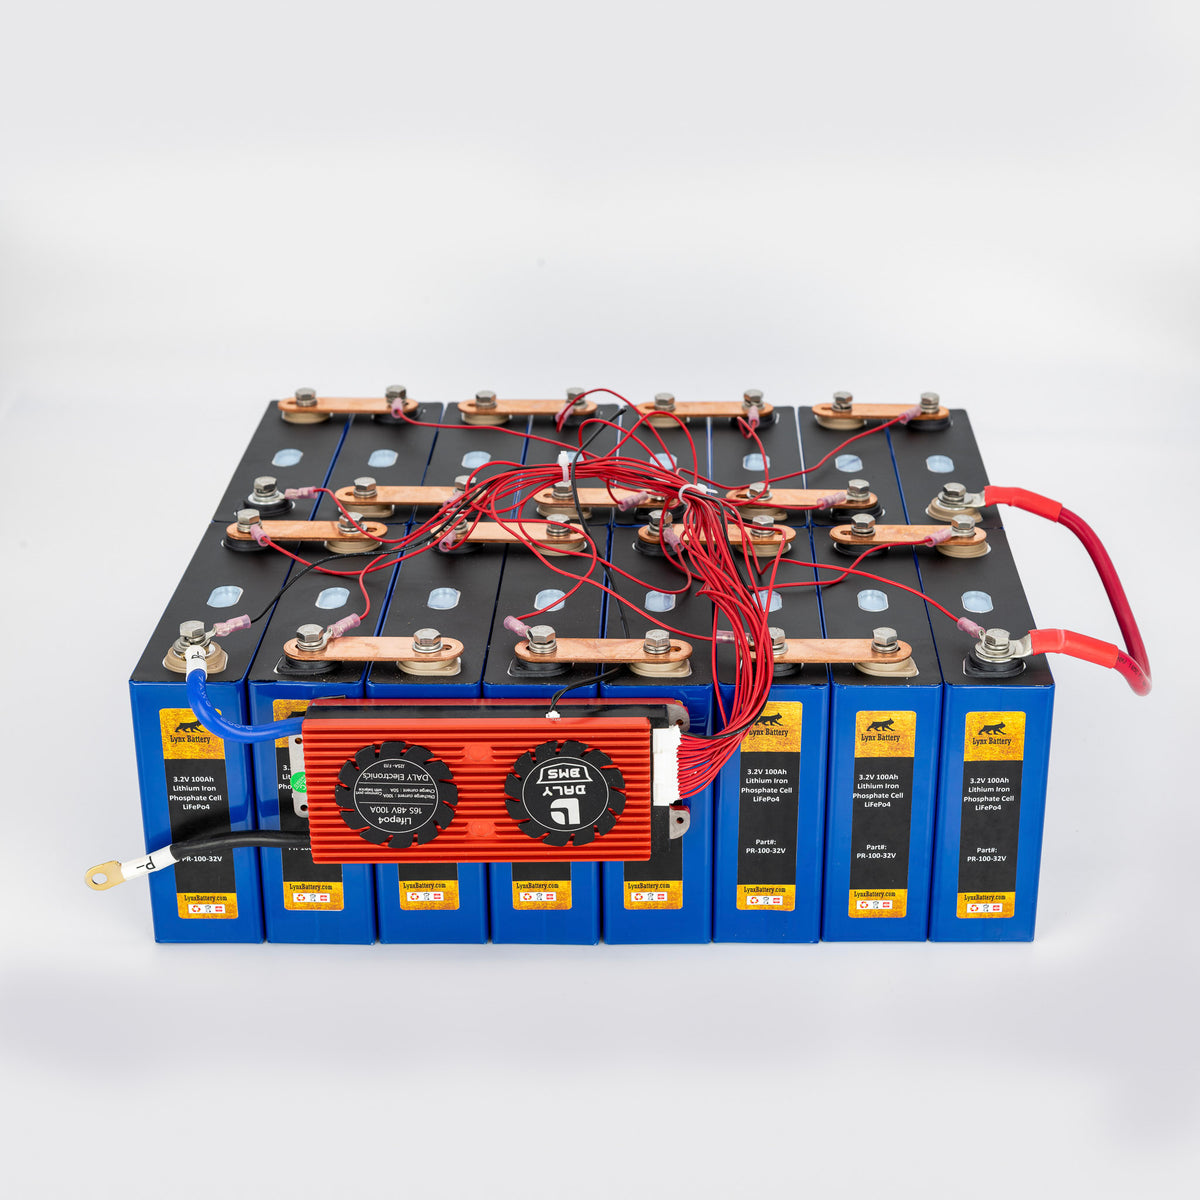 48V 100Ah Lithium Iron Phosphate (LiFePO4) Battery with 100A BMS